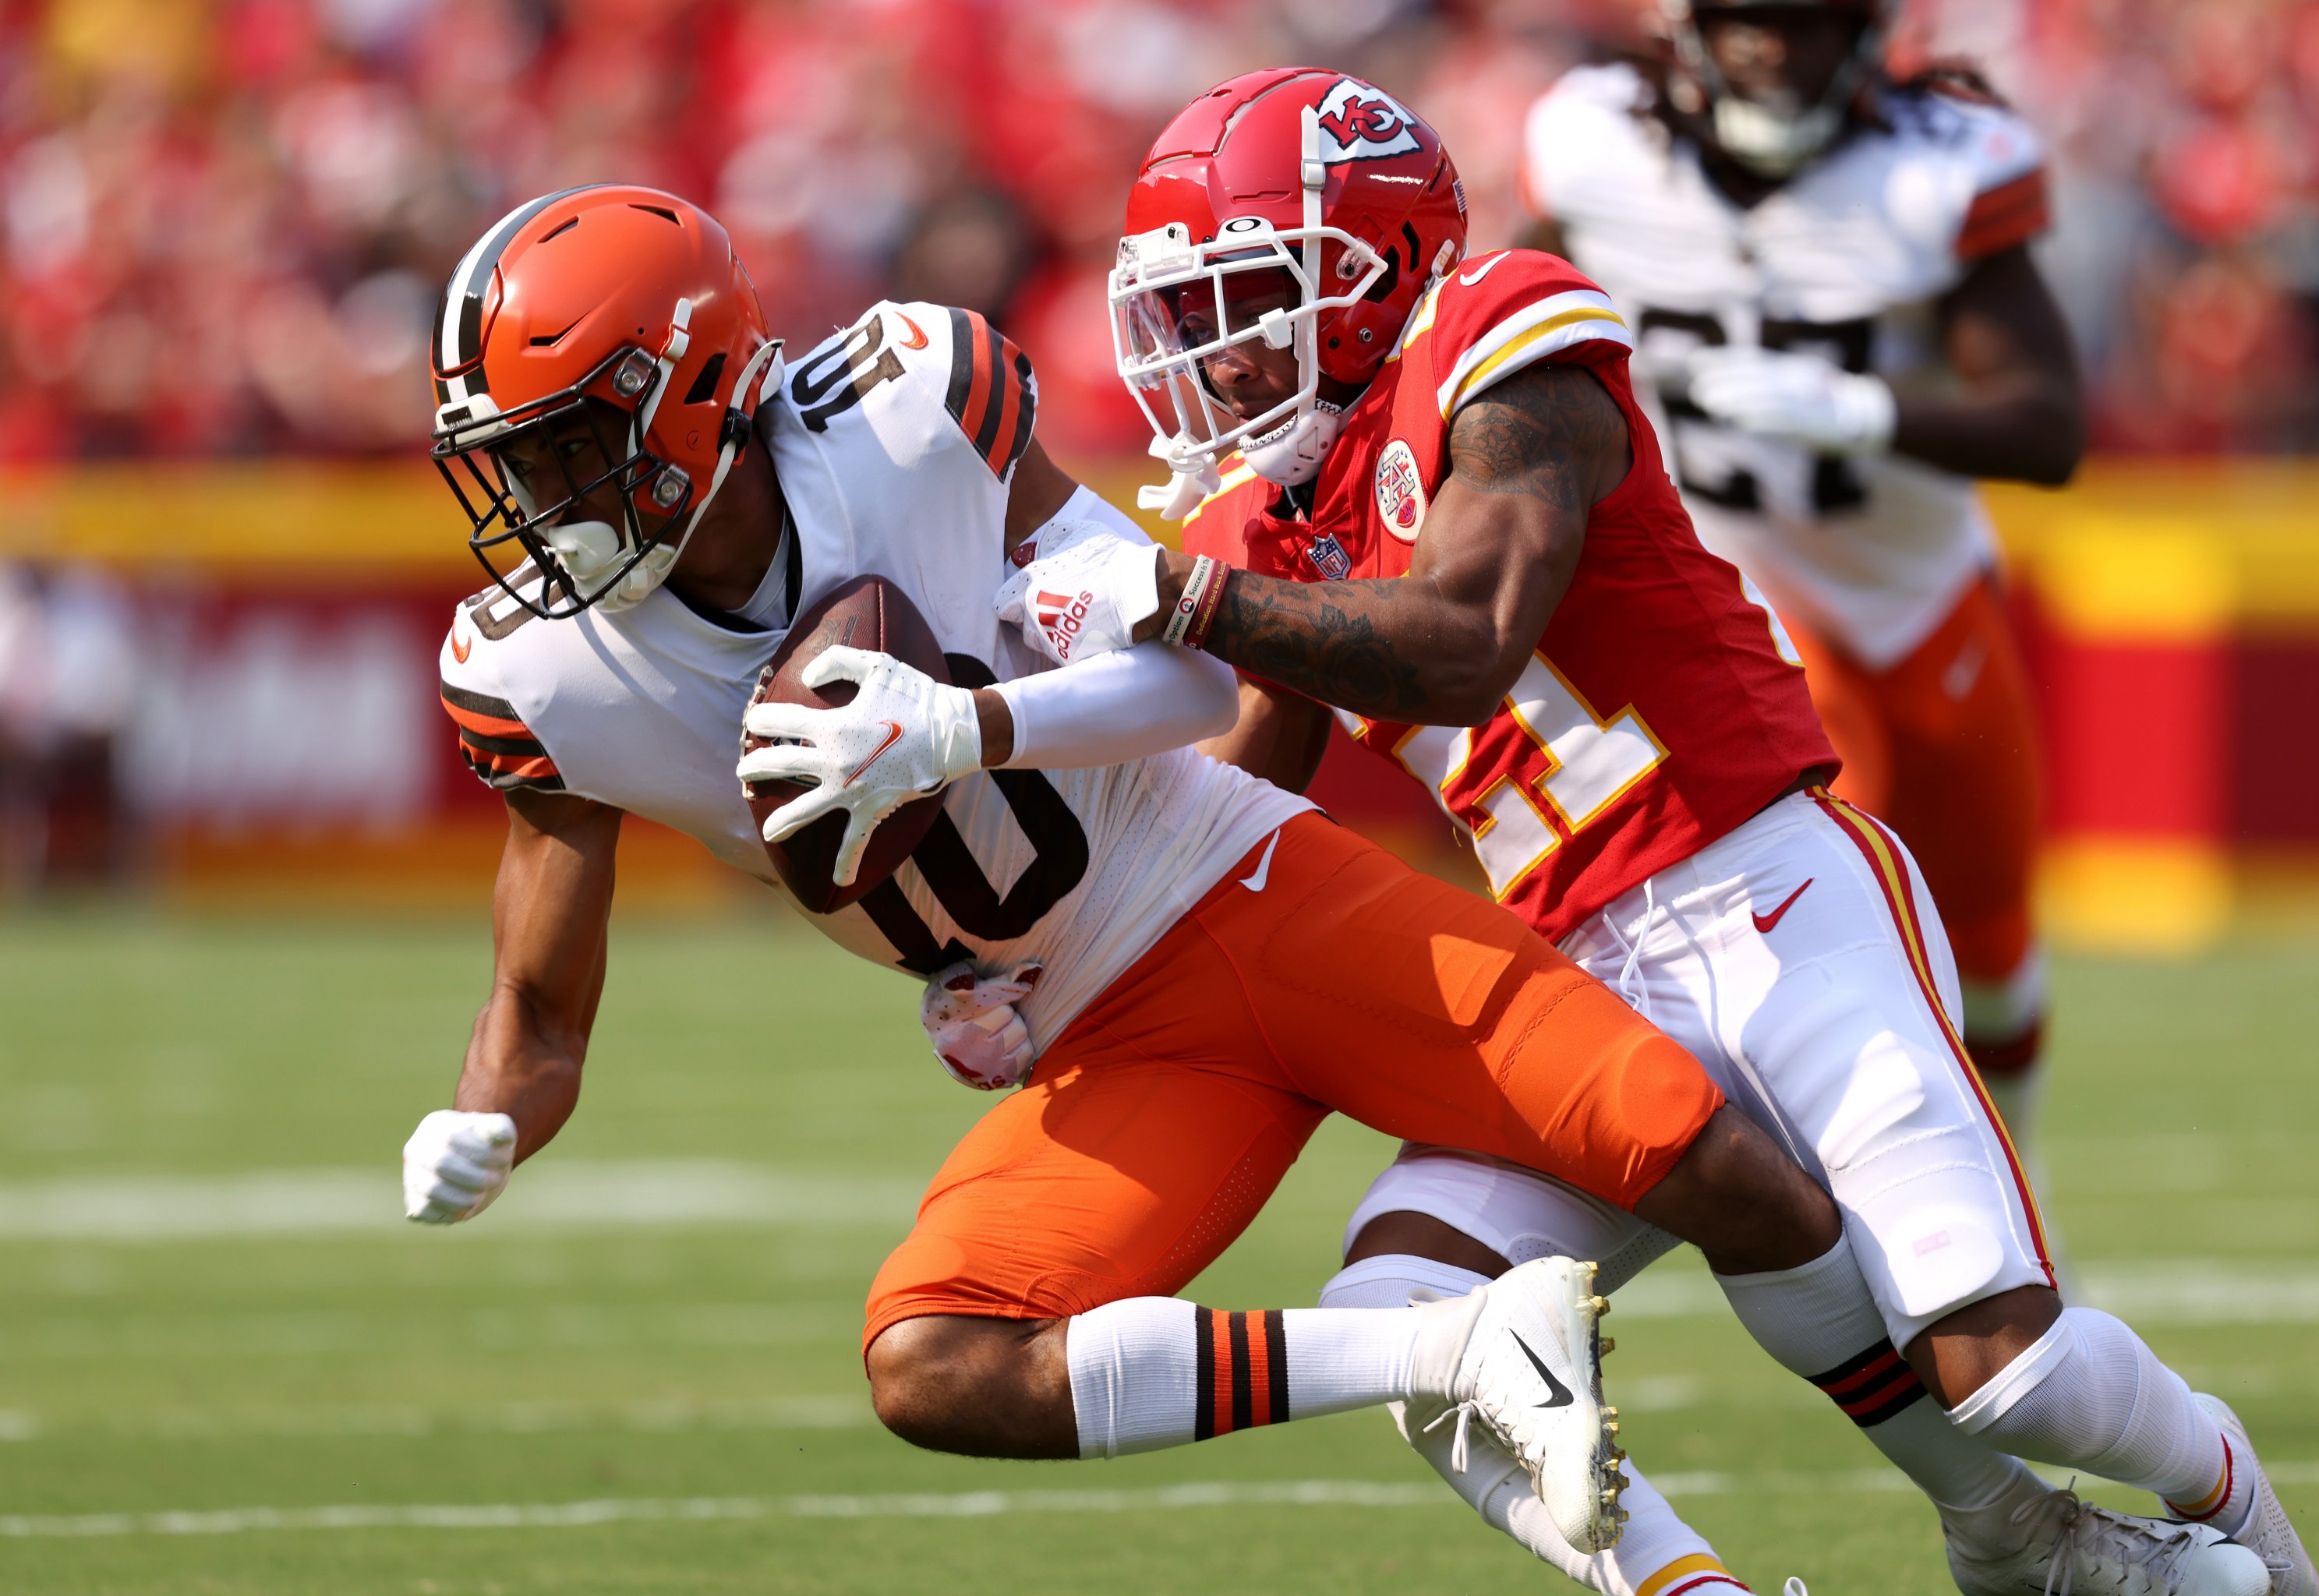 Replay: Cleveland Browns lose 33-29 to Kansas City Chiefs